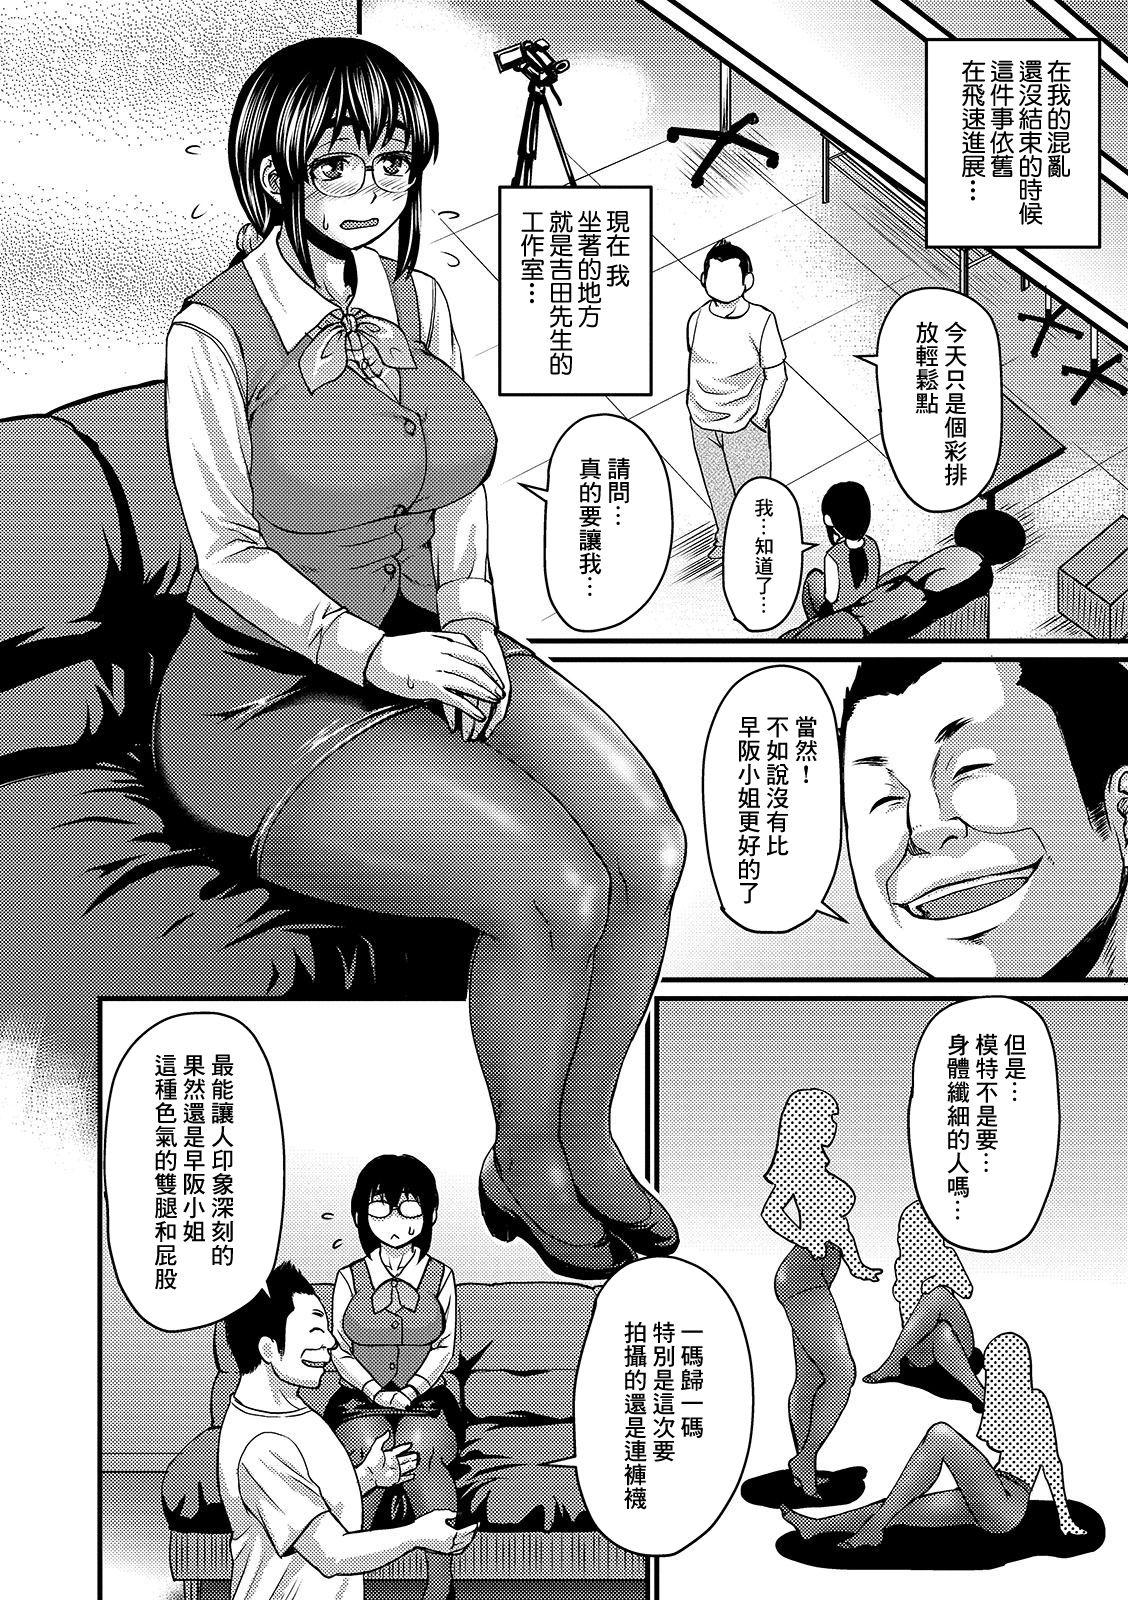 Squirt 早坂さんのムチ蒸れパンスト撮影 Assfucking - Page 4